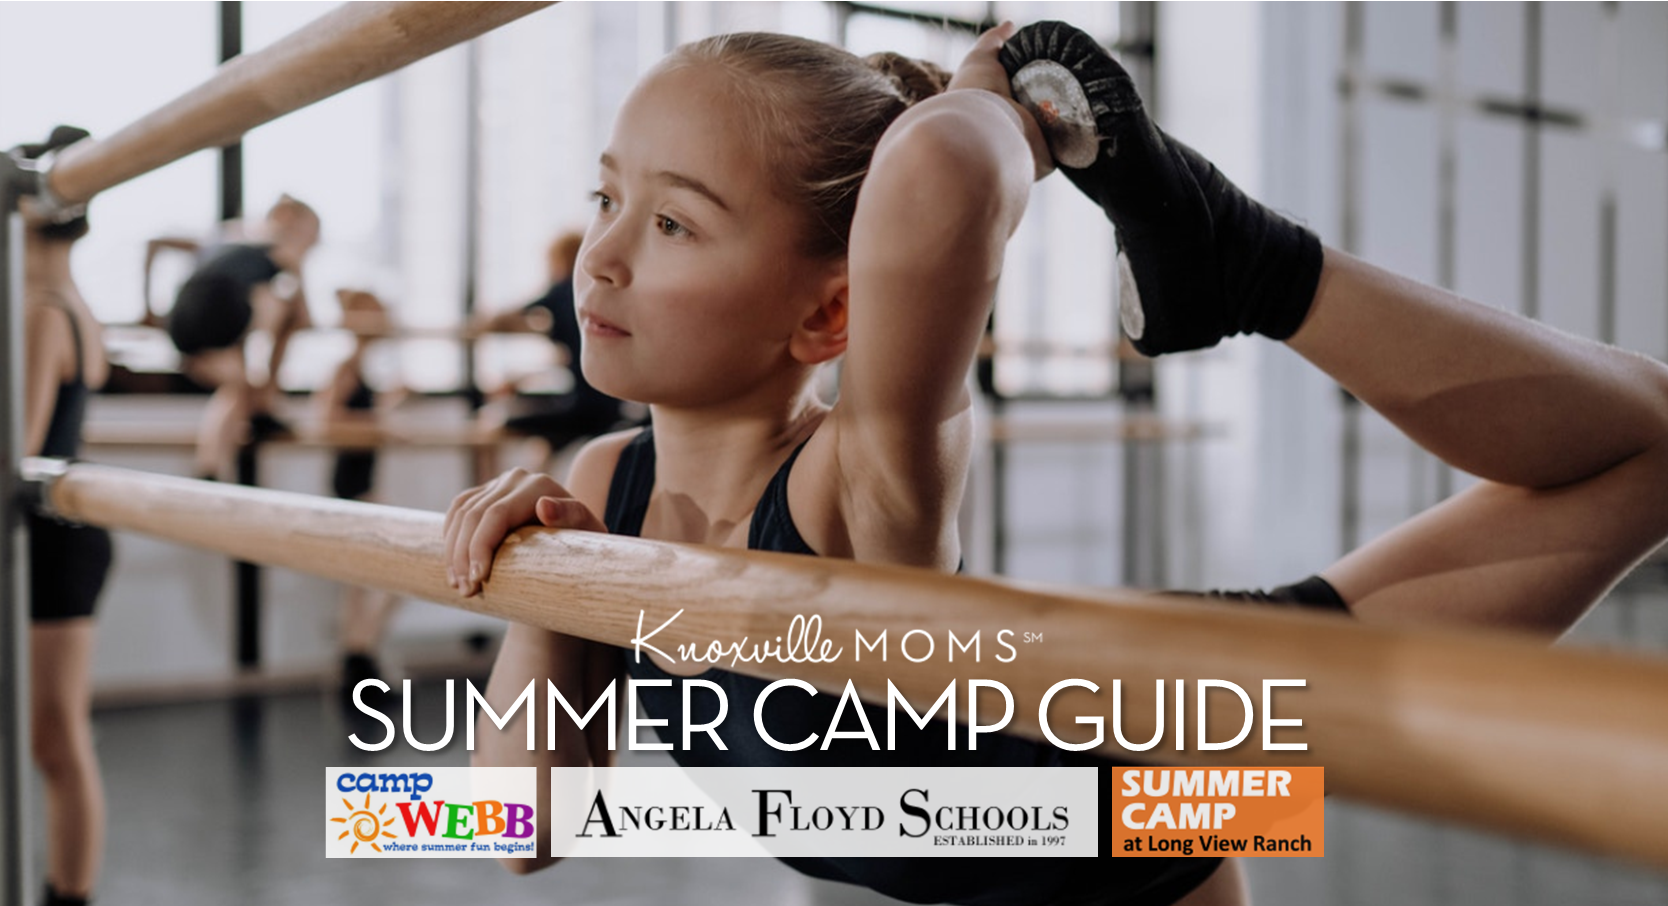 Knoxville Moms 2022 Summer Camp Guide